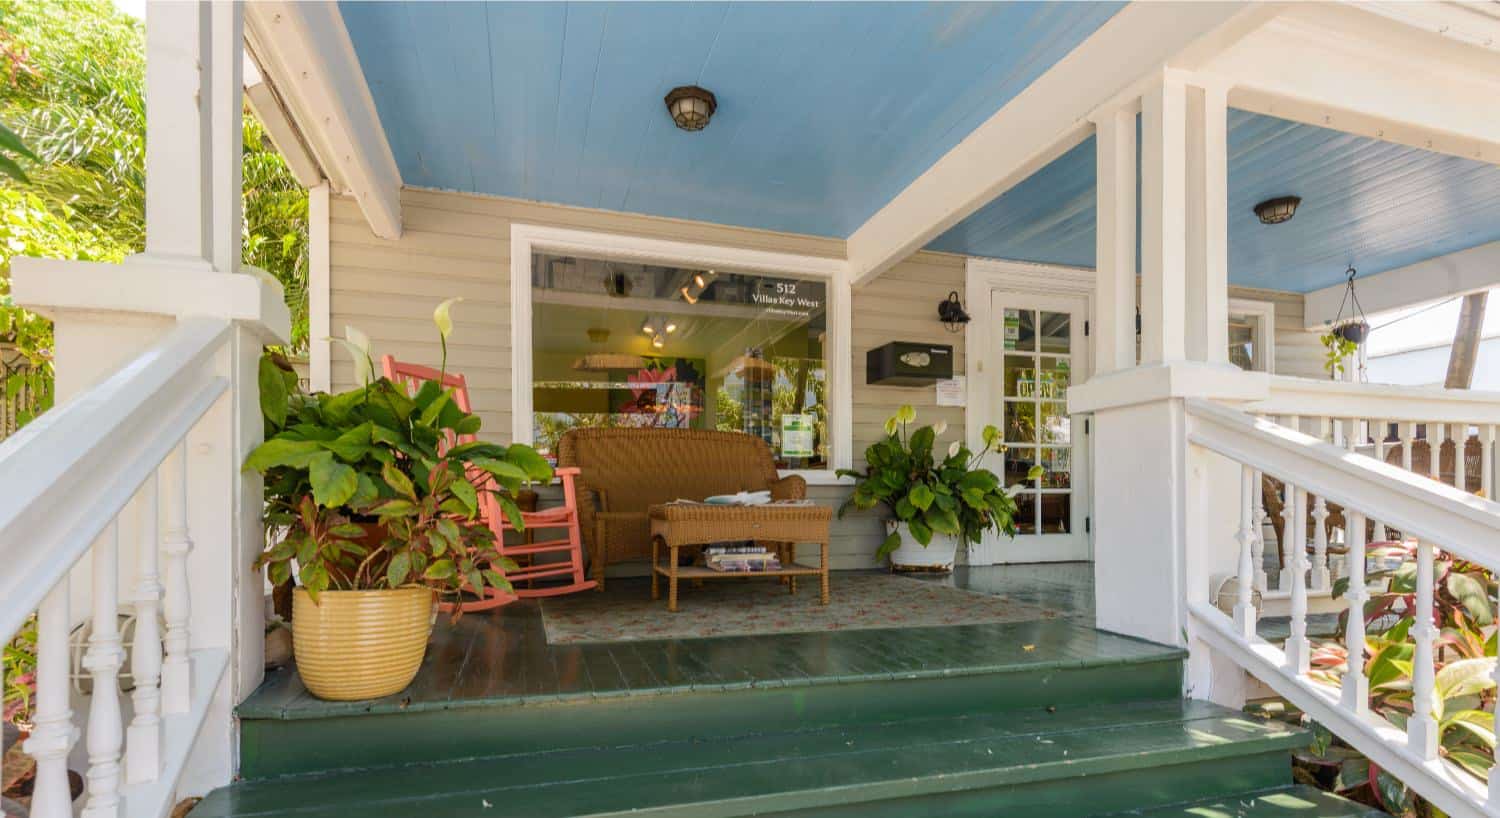 Front entrance of property with front porch, dark green wooden steps and flooring, wicker love seat, and salmon wooden rocking chair